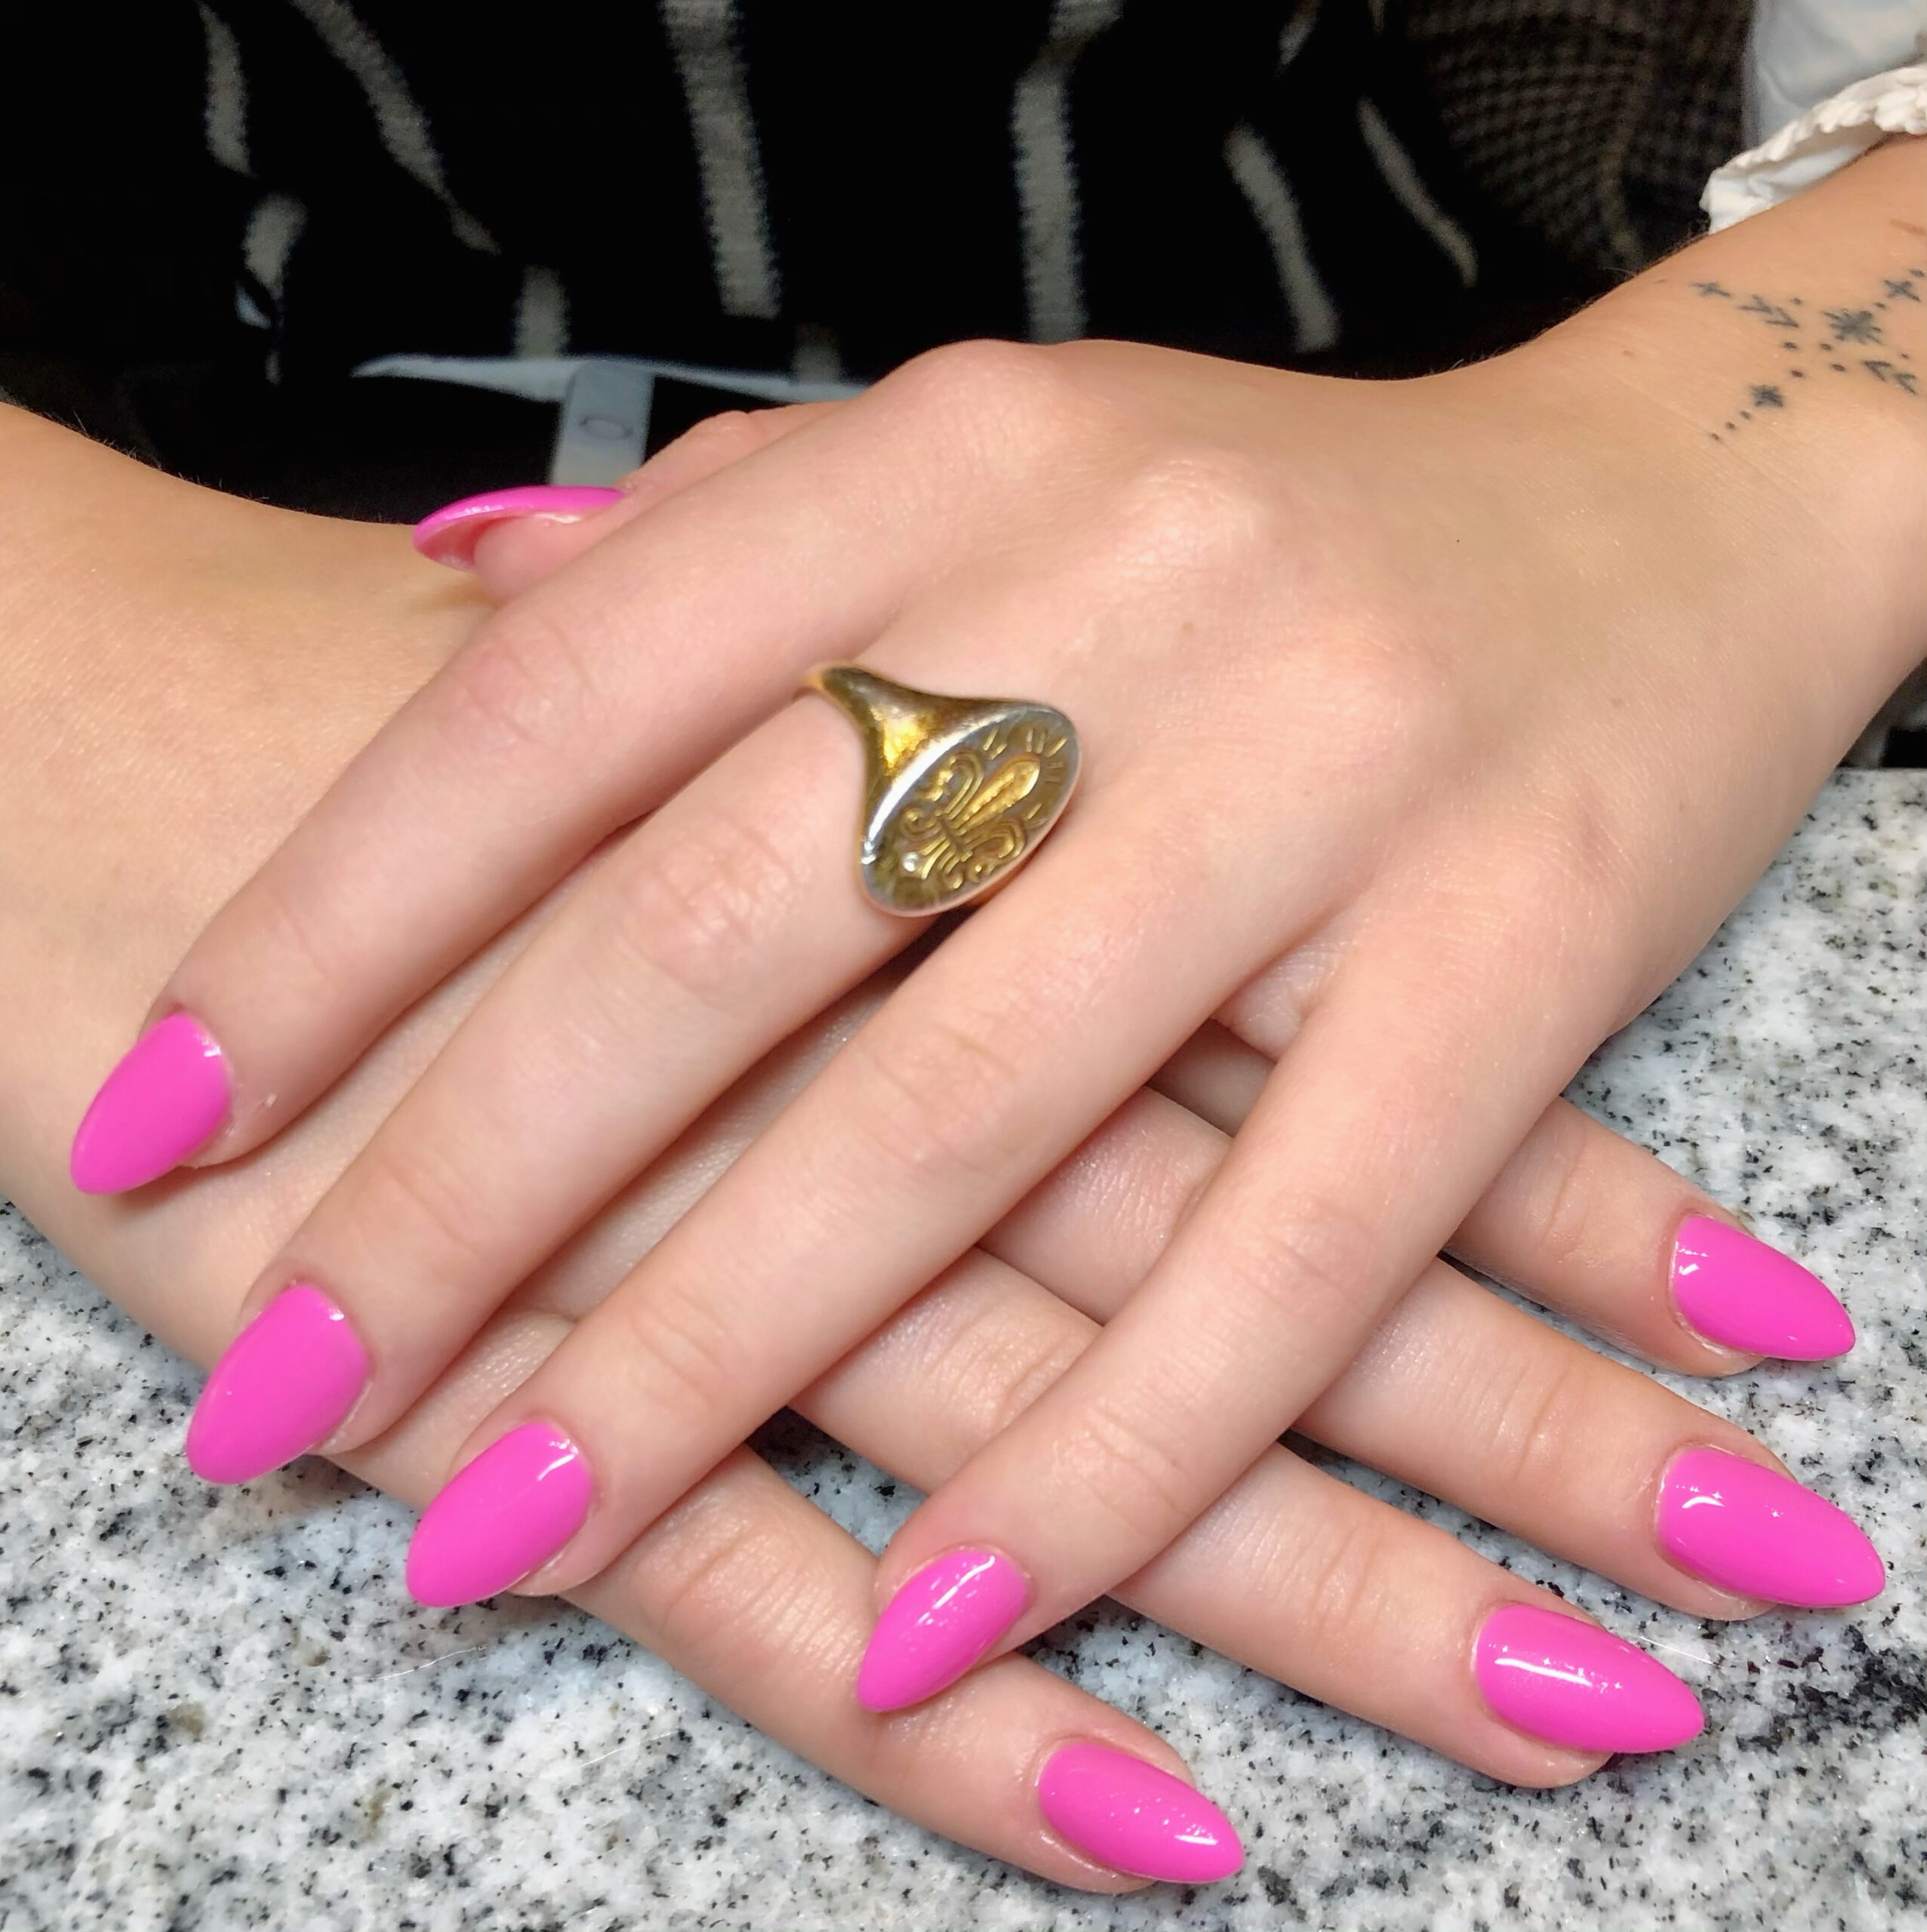 Gel Nails with Bright Pink